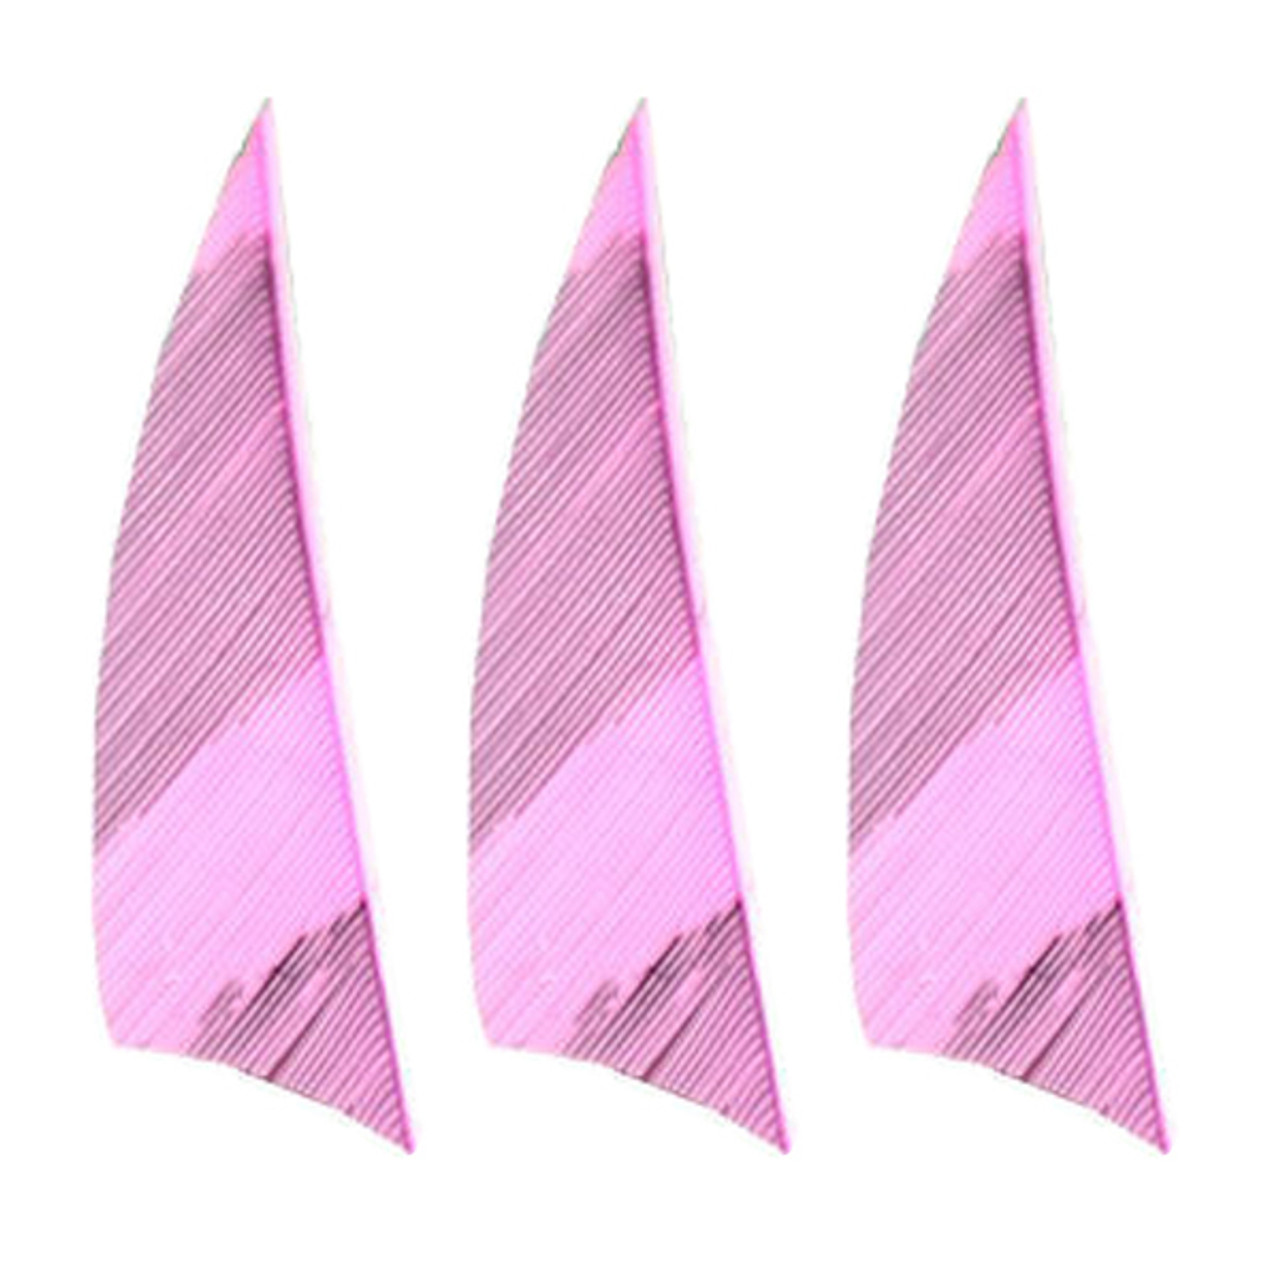 Muddy Buck Gear 2" RW Shield Barred Feathers - 50 Pack (Flo Pink)